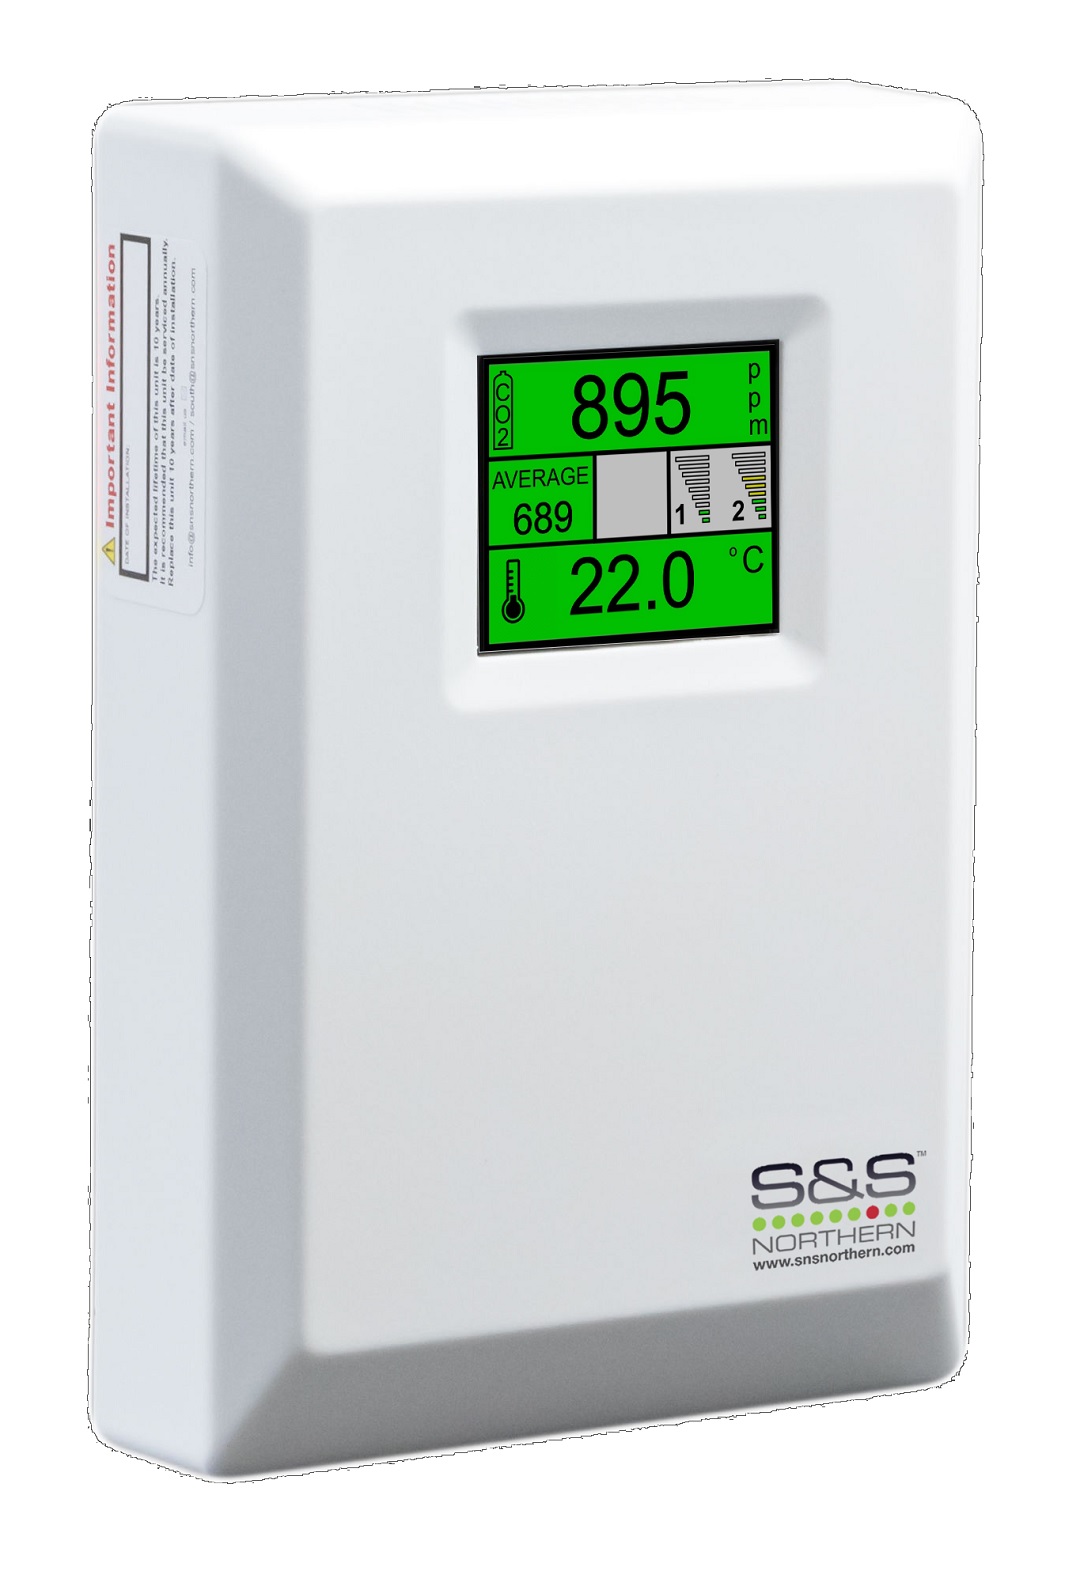 S&S Northern Merlin CO2-X Carbon Dioxide & Temperature Monitor 